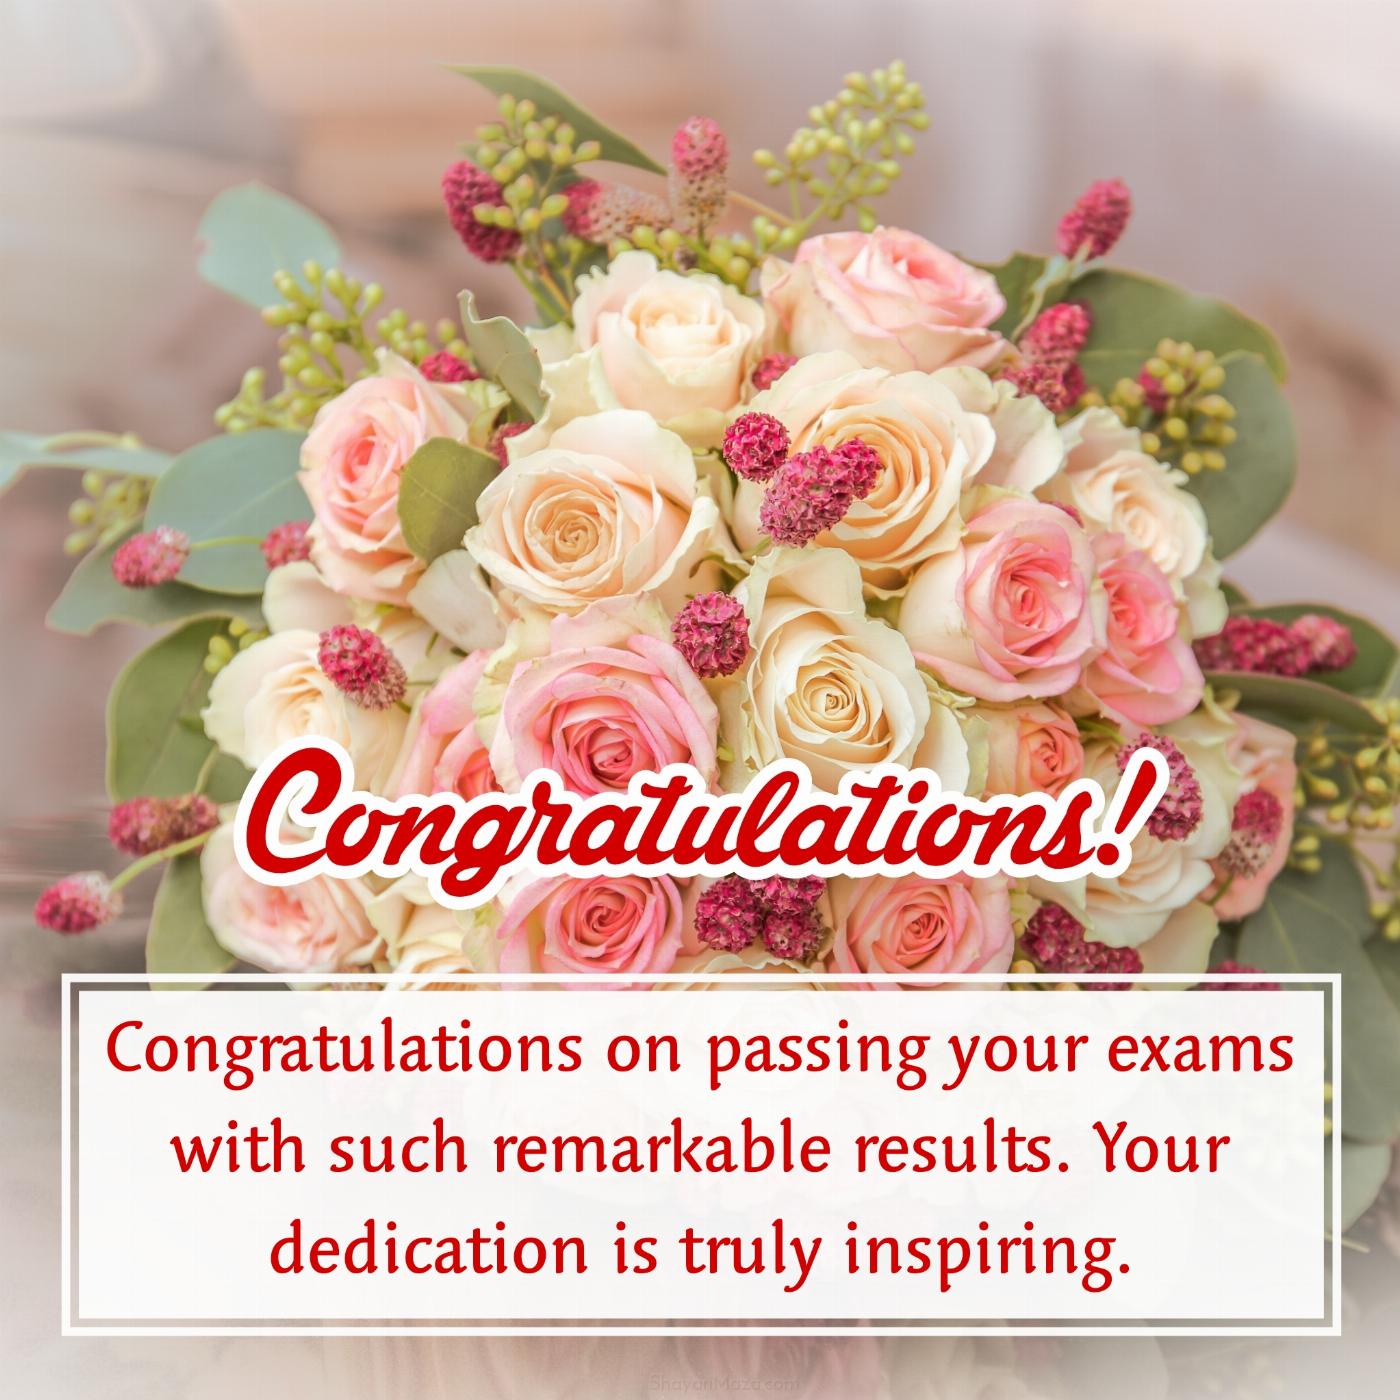 Congratulations on passing your exams with such remarkable results